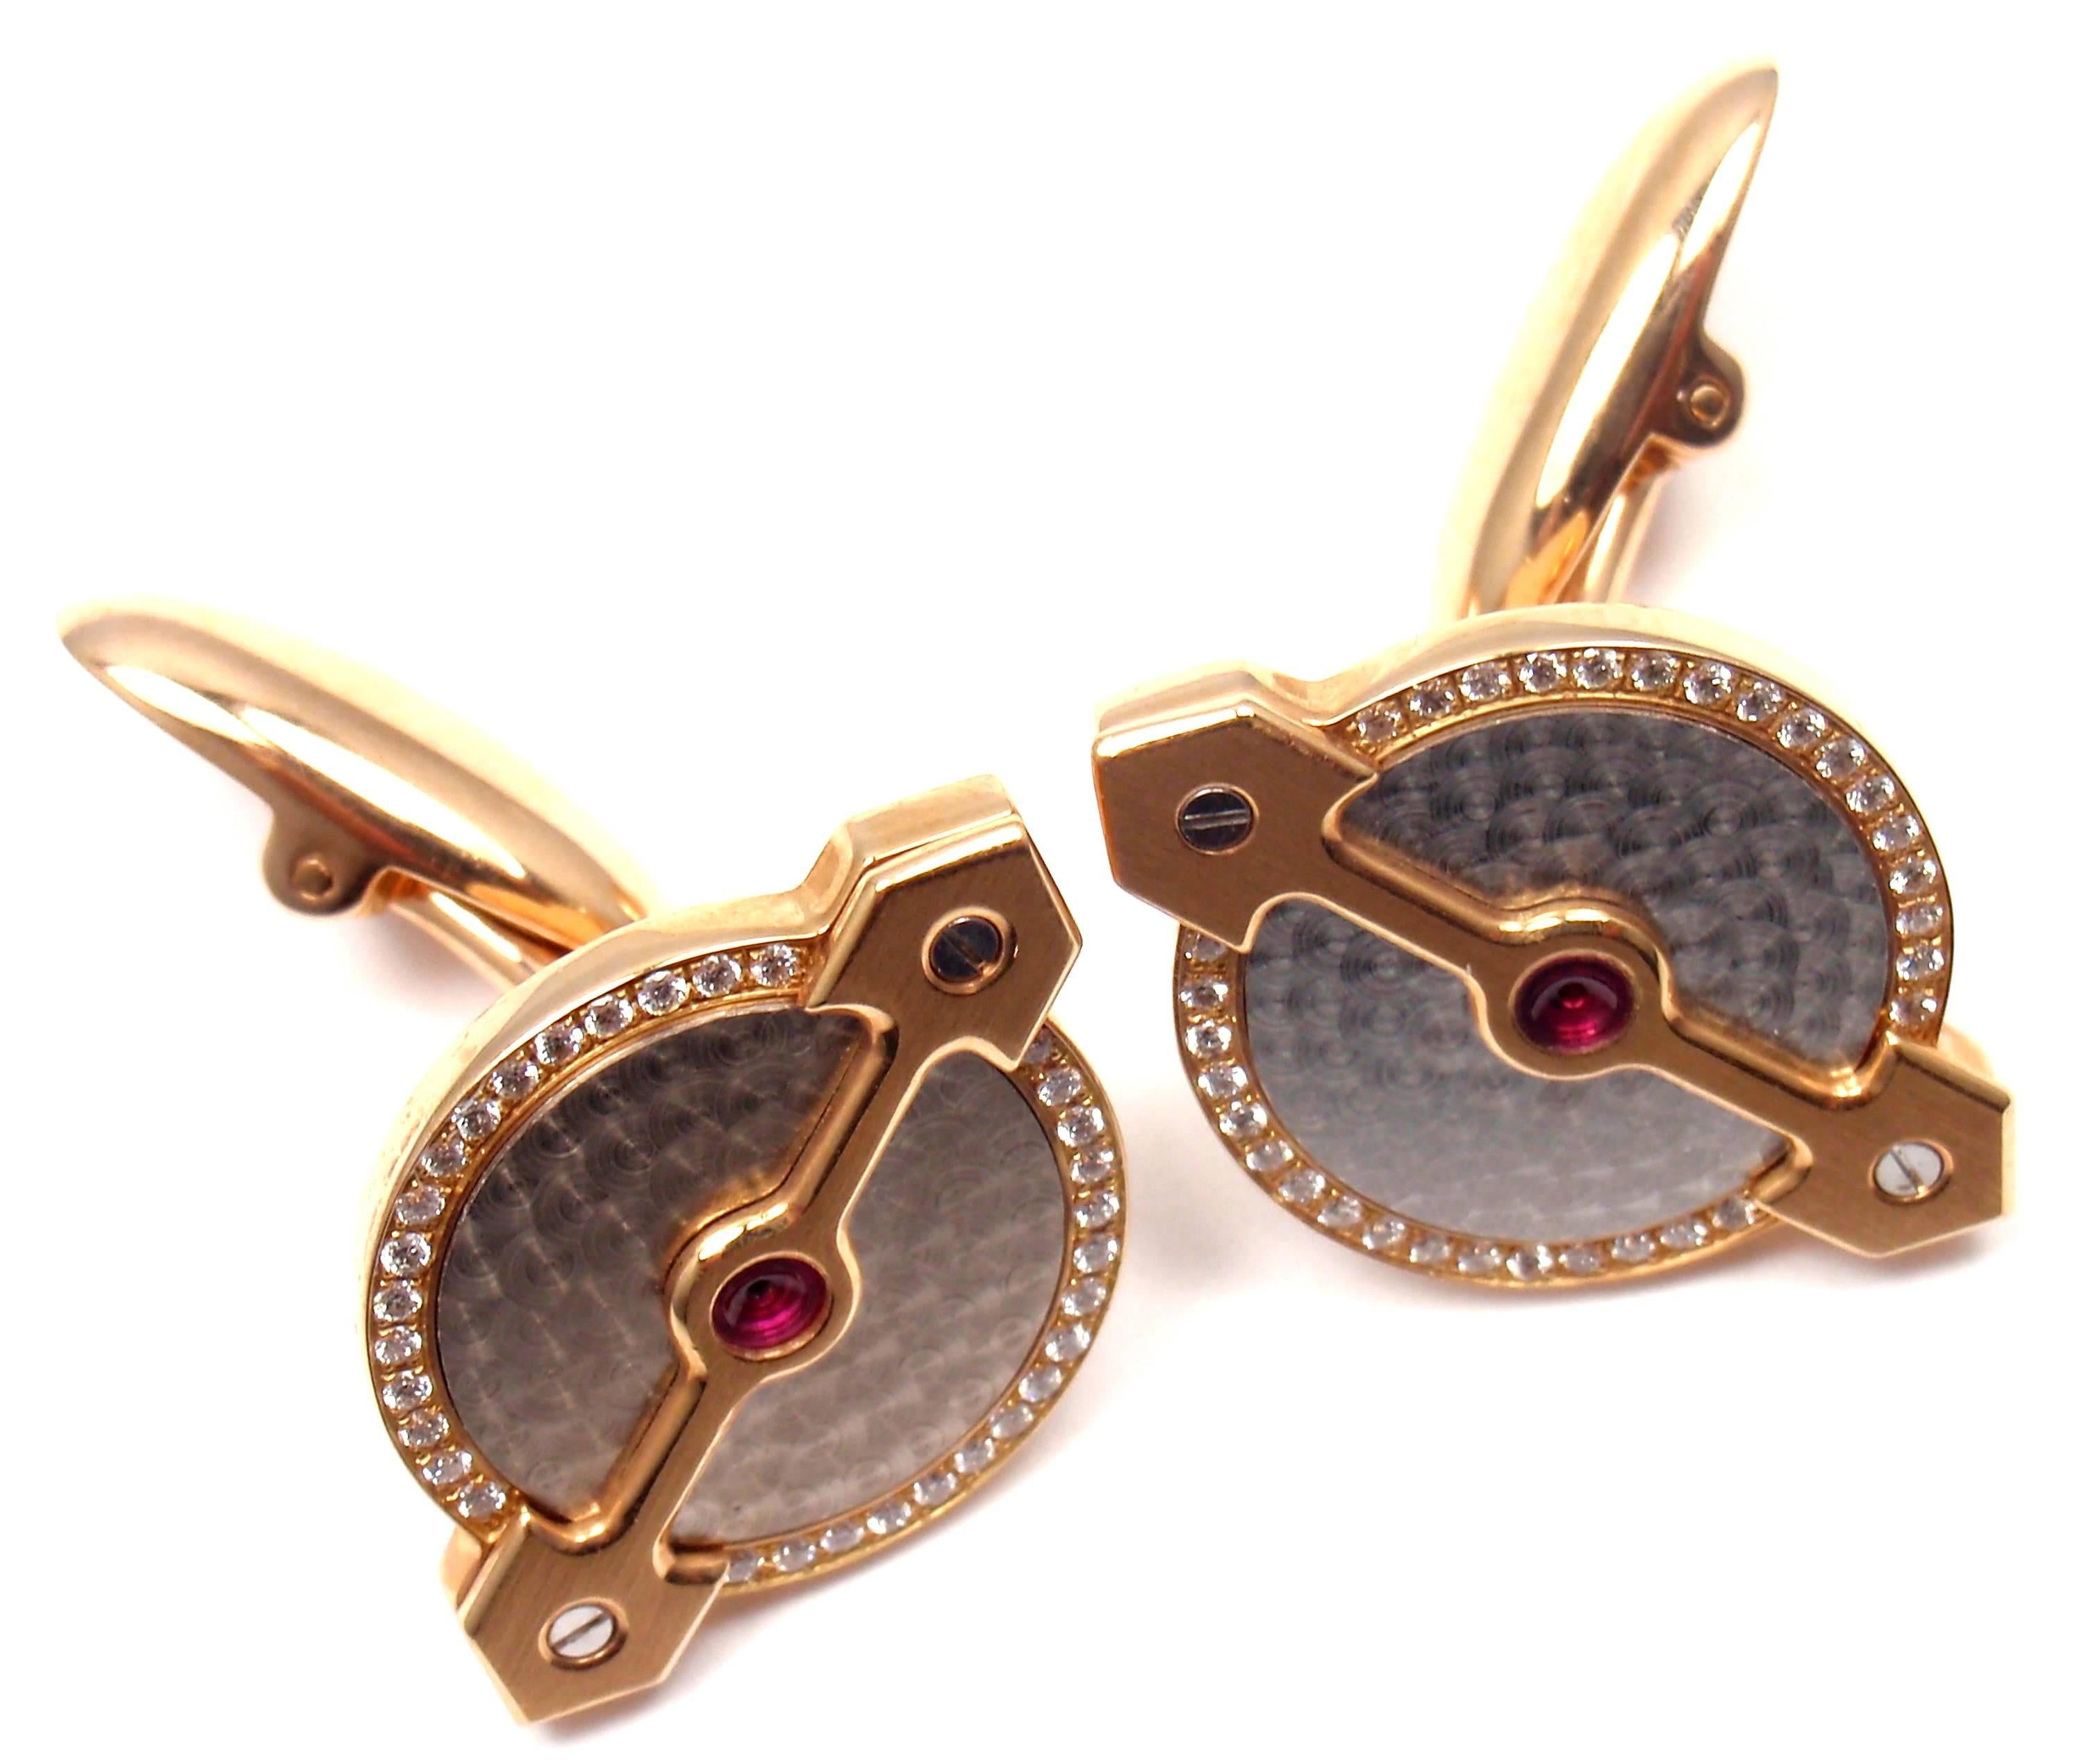 18k Rose Gold Bridge Diamond Ruby Cufflinks by Girard Perregaux.
With 64 round brilliant cut diamonds VS1 clarity, G color total weight approx. .32ct and 2 round rubies.
These cufflinks come with original box.

Details:
Measurements: 23mm x 16mm x